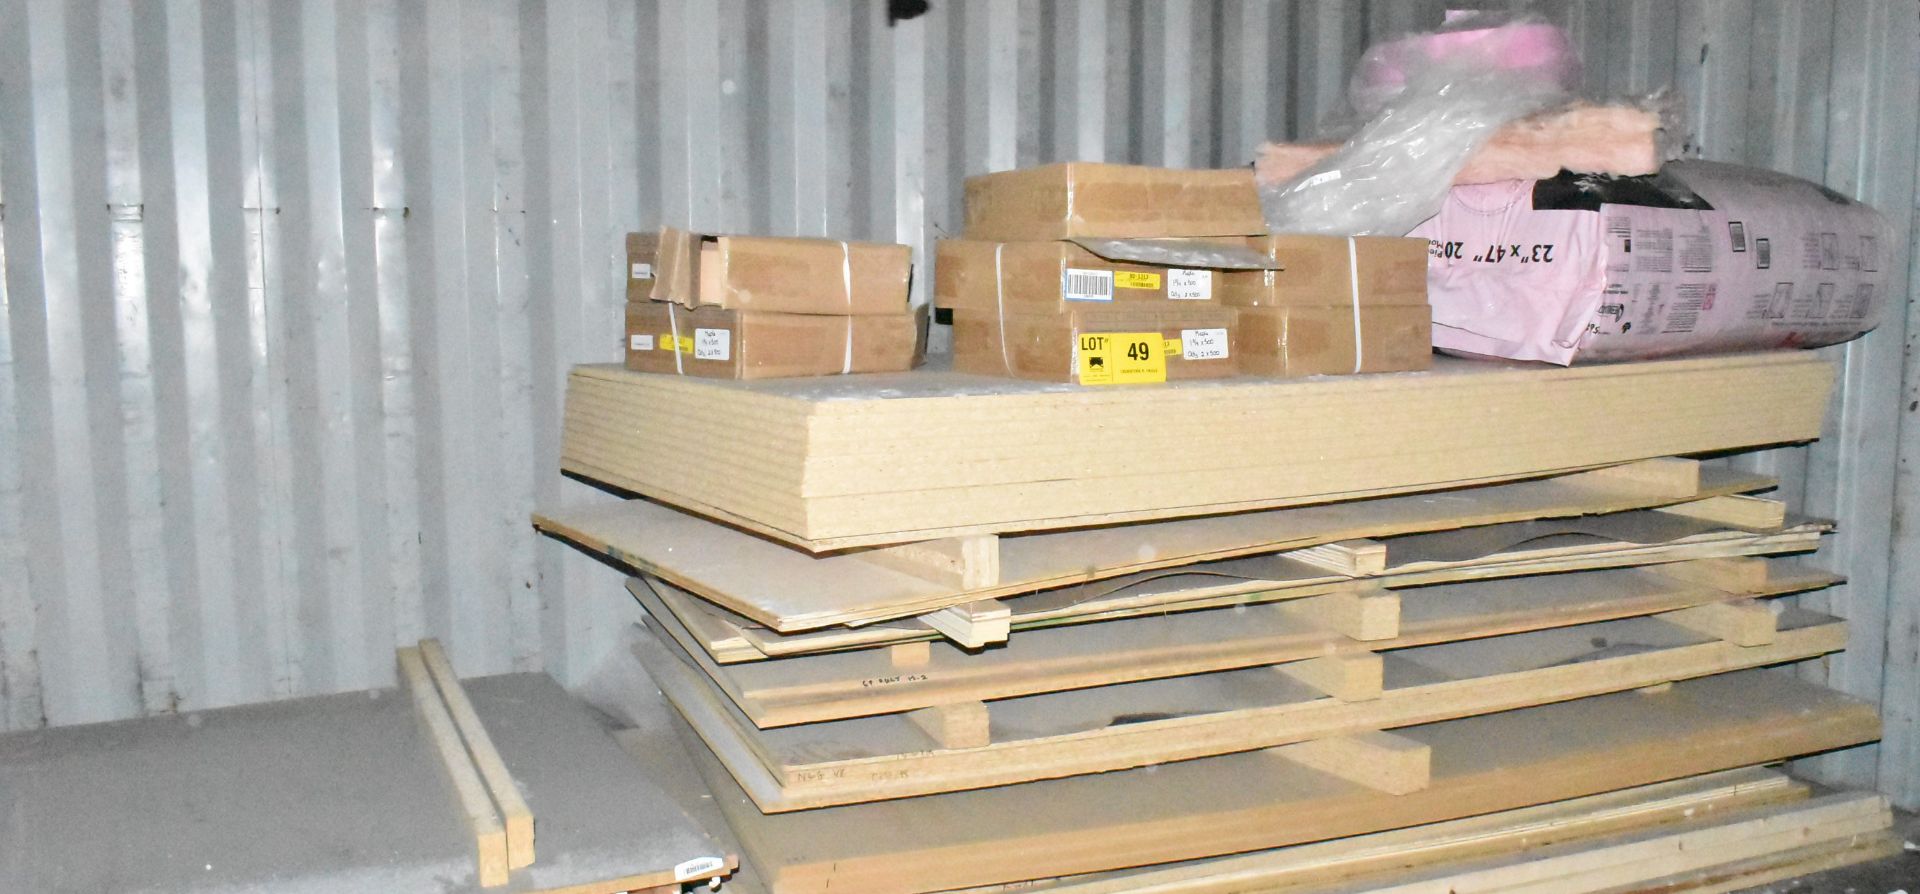 LOT/ CONTENTS OF 20' STORAGE CONTAINER CONSISTING OF MDF & PARTICLEBOARD SHEET MATERIAL, VENEER - Image 3 of 4